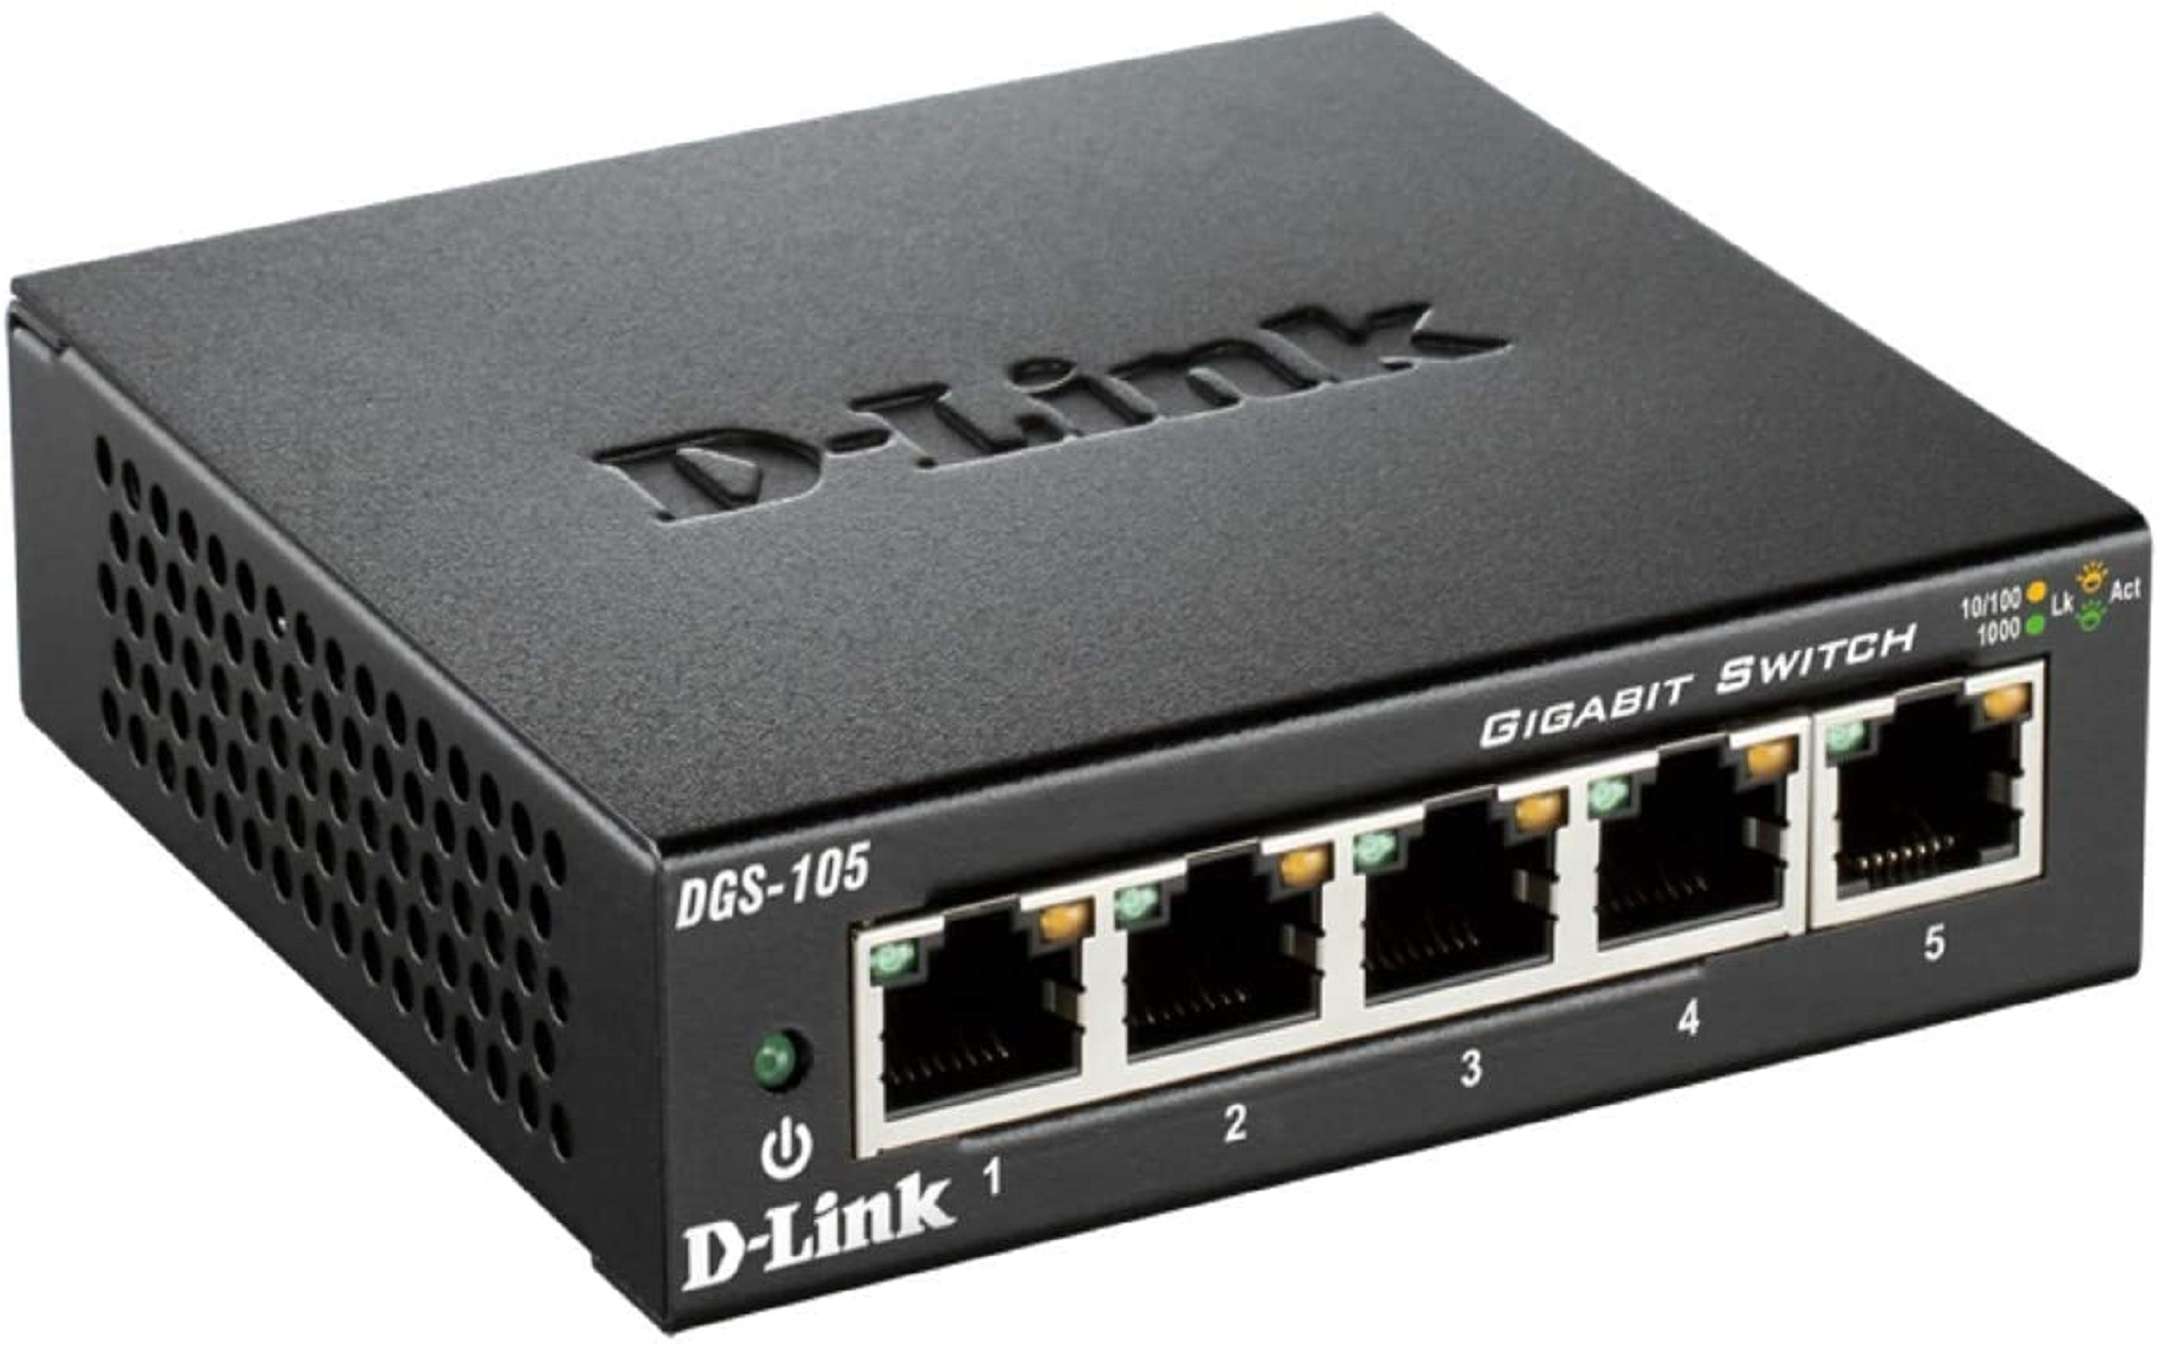 D-Link switch with 5 ports for only 18.99 euros